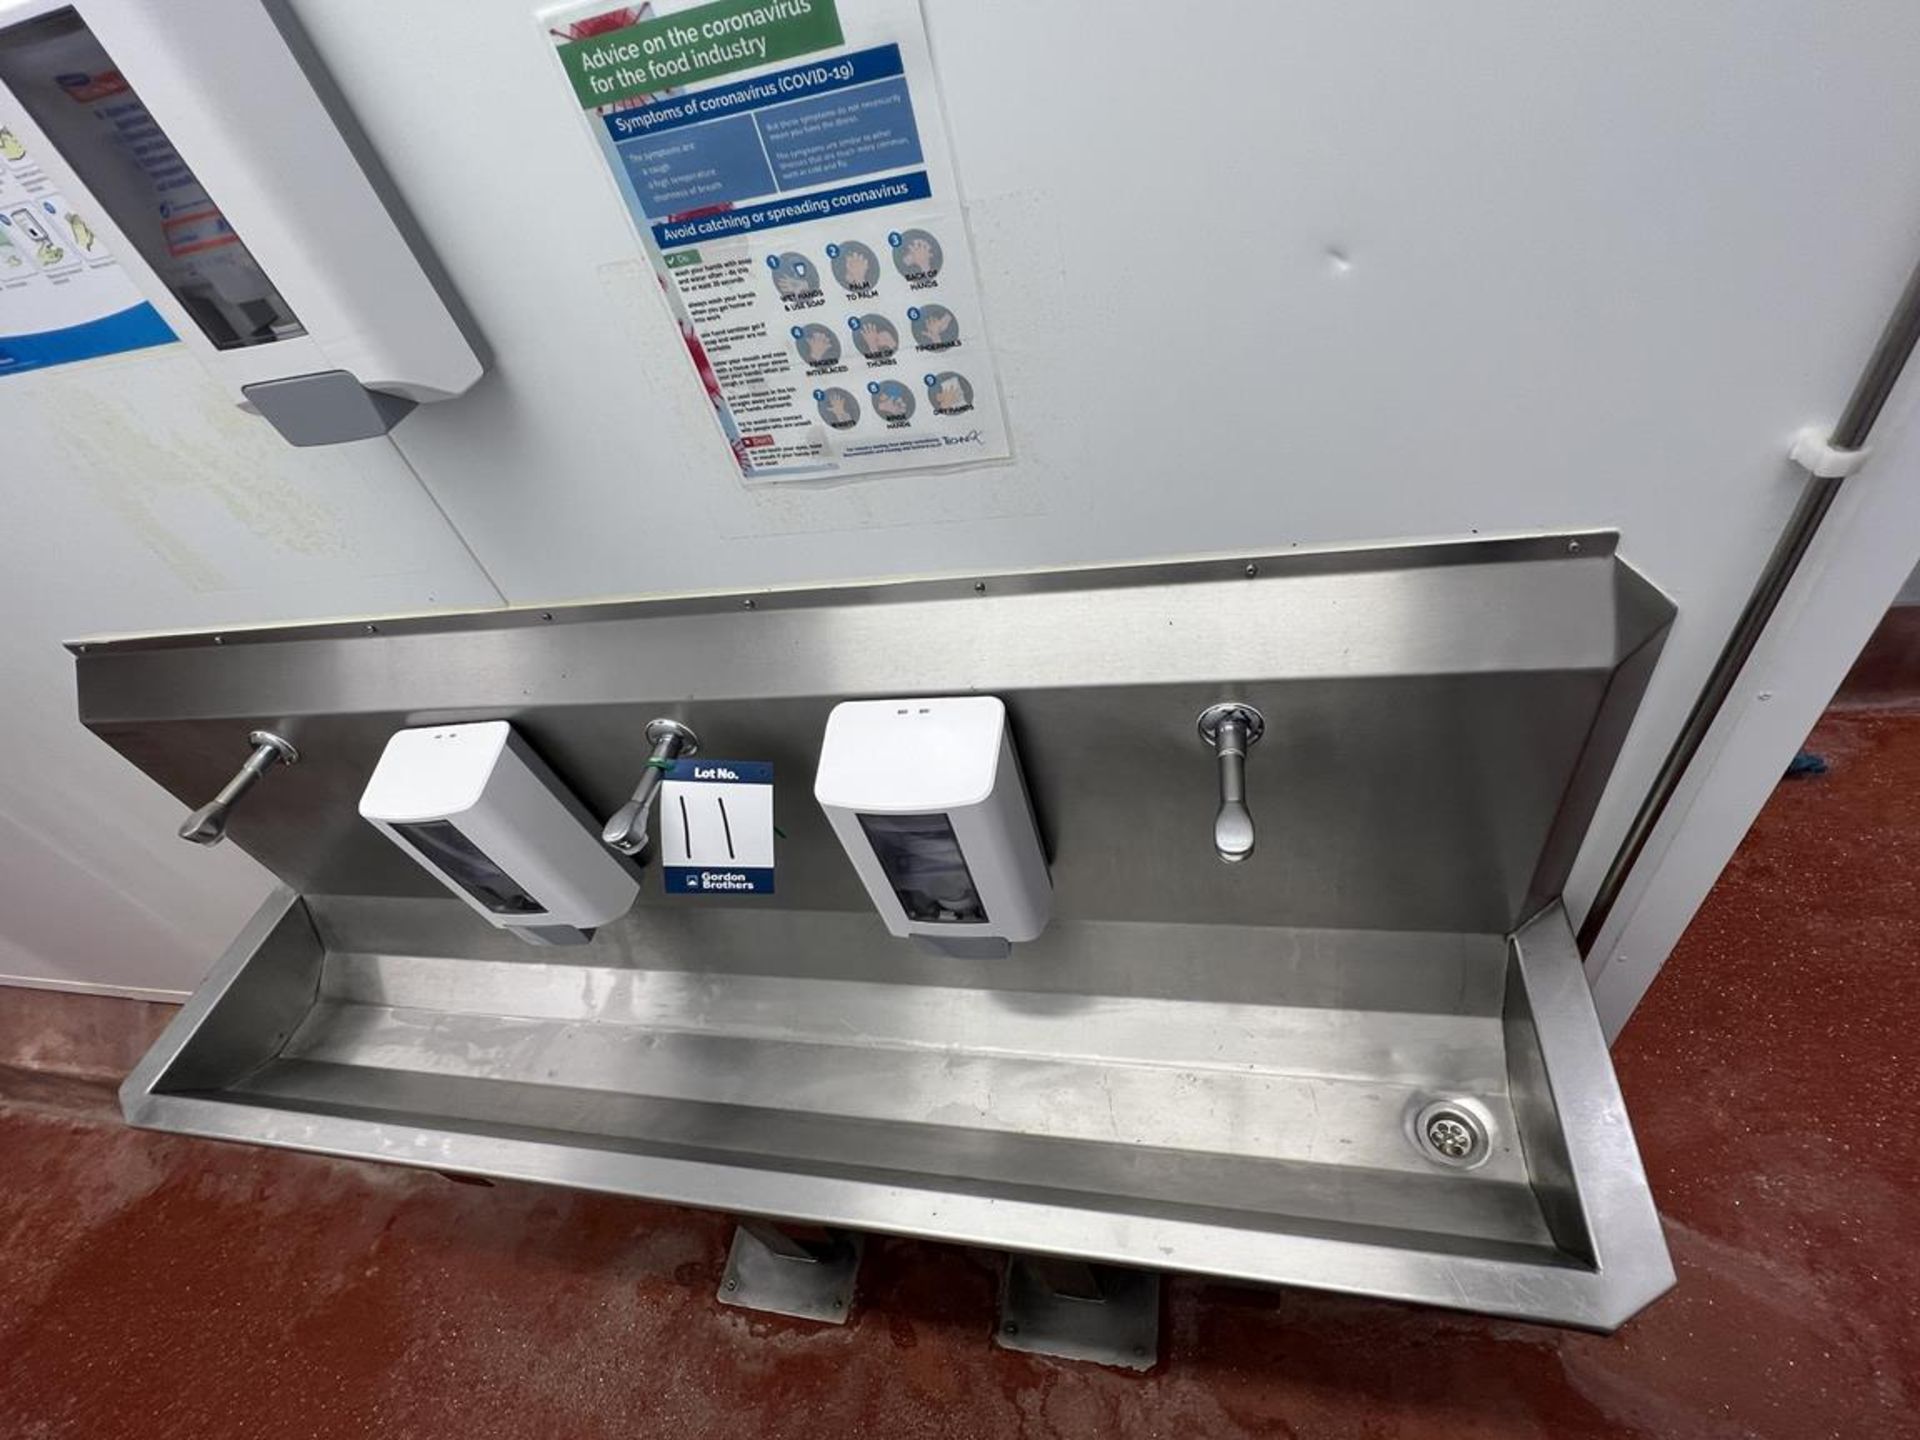 Hygienox Teknomek, three position, knee operated, stainless steel sink unit, 1.6m x 380mm x 1.3m (H) - Image 8 of 10